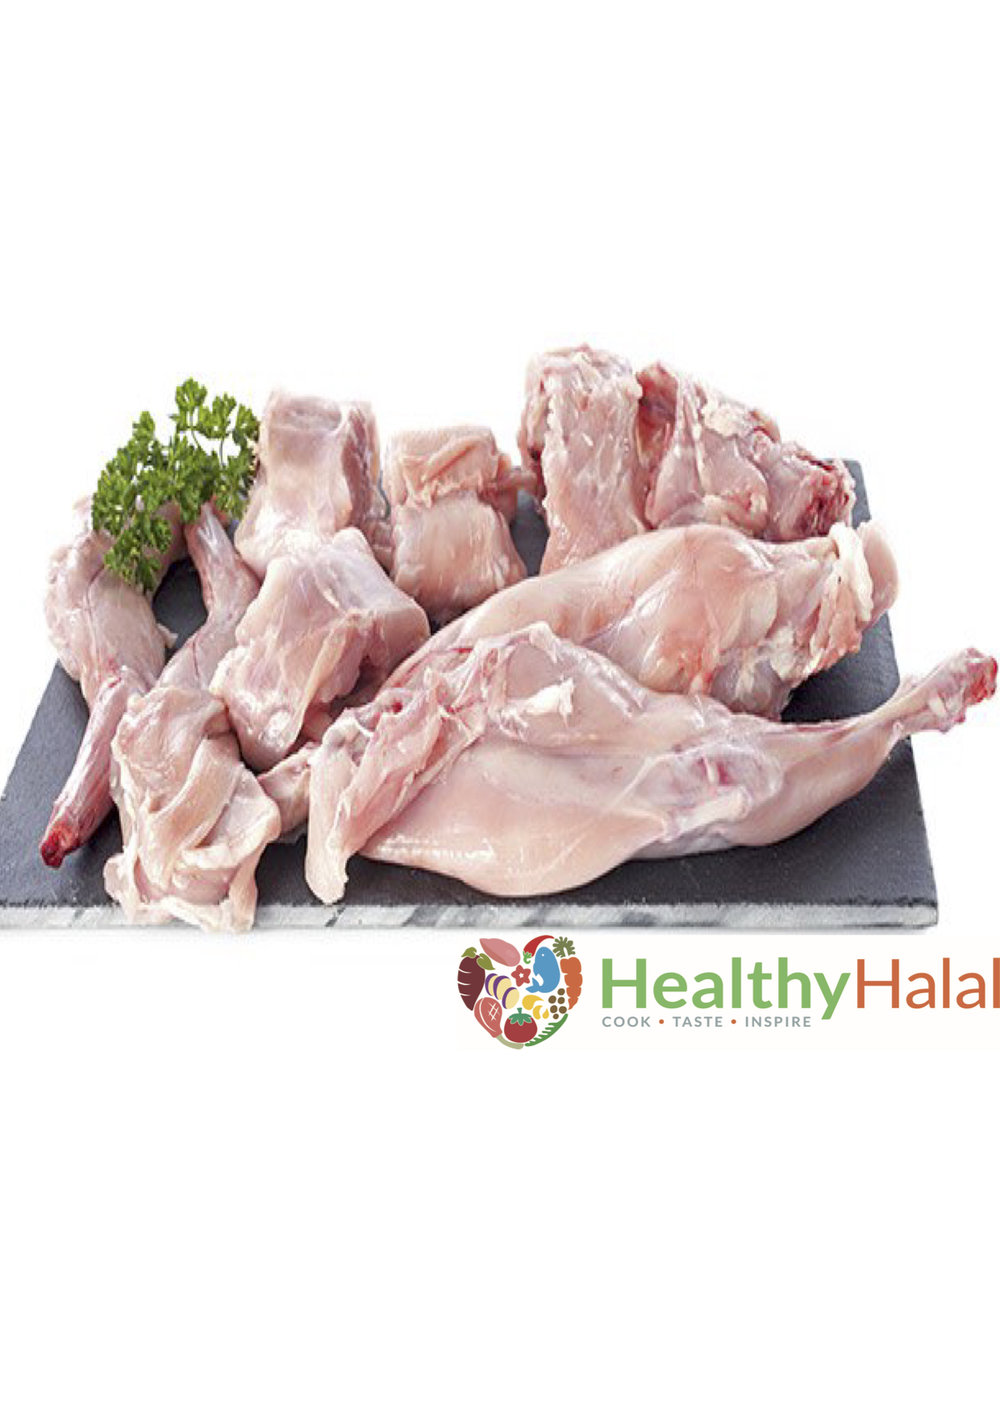 Healthy halal online uk delivery meat whole rabbit